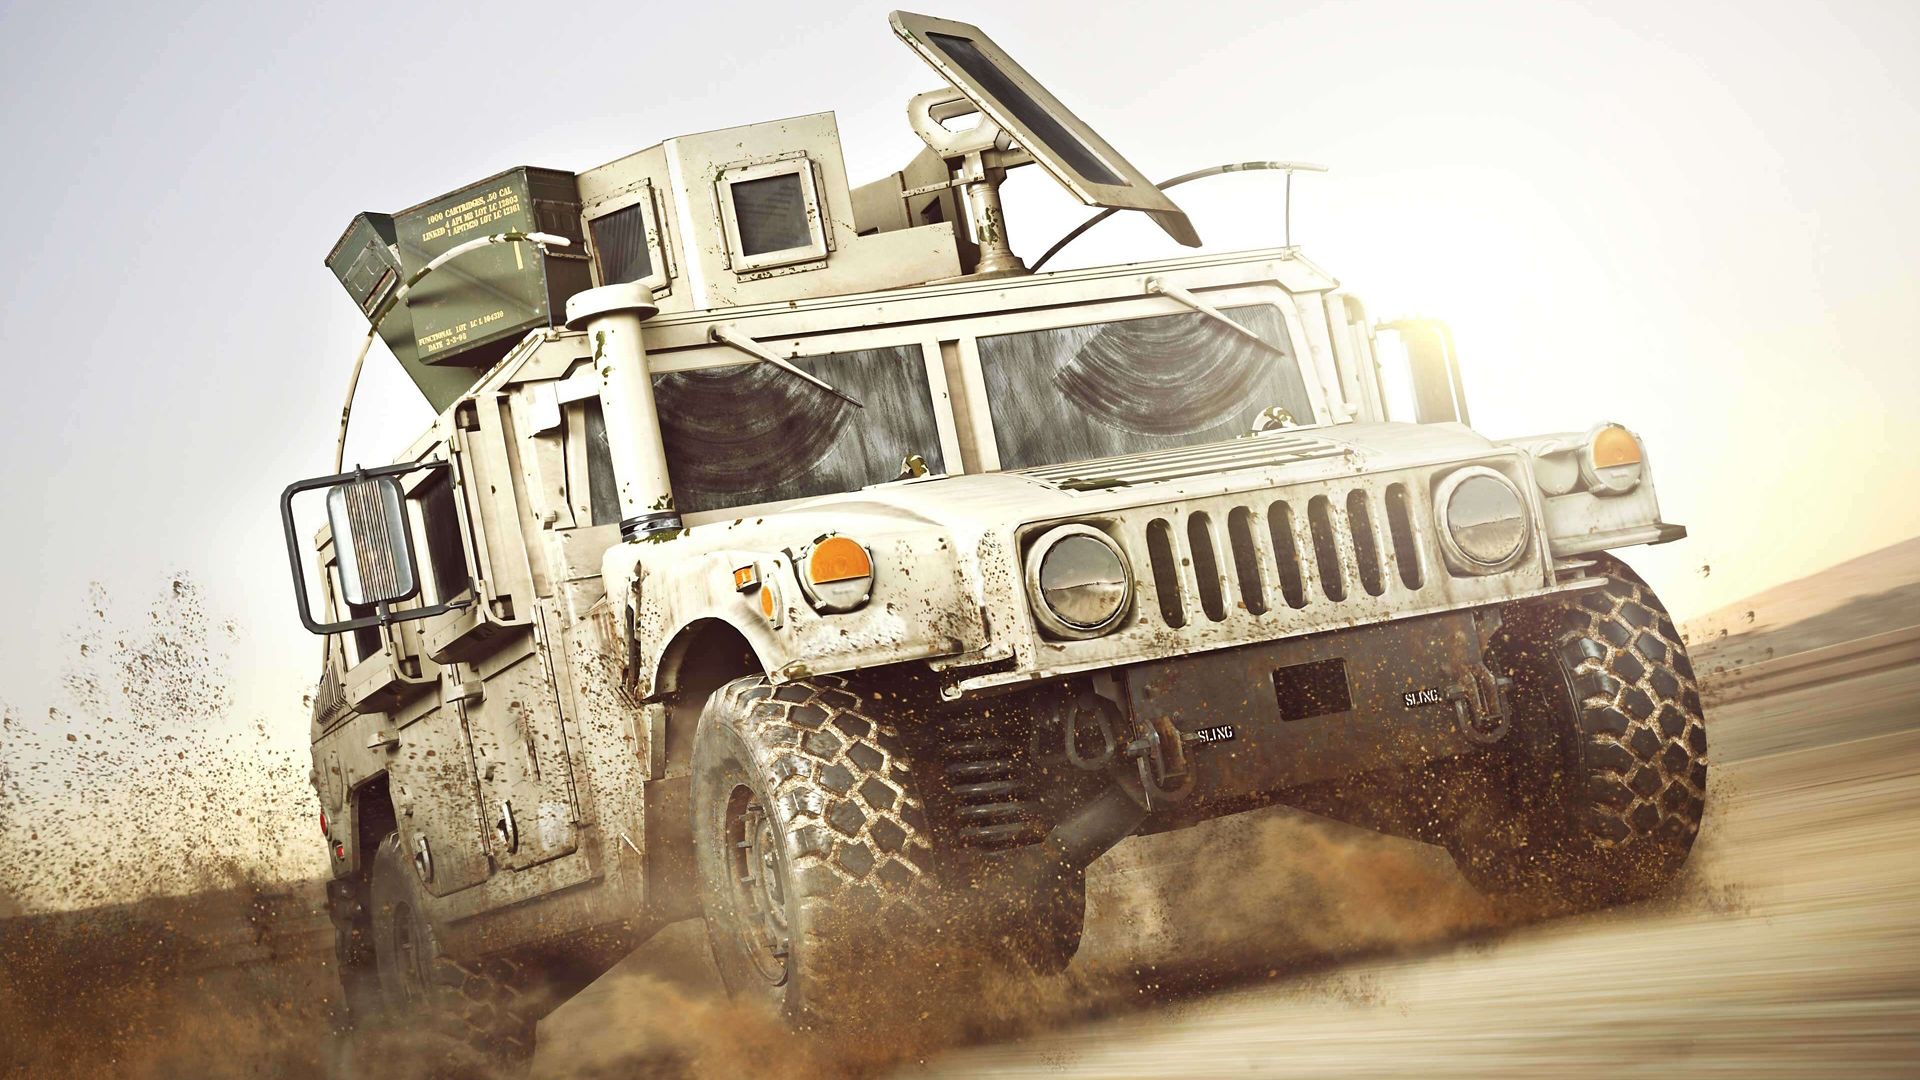 specialty vehicle, military vehicle on road driving through dirt